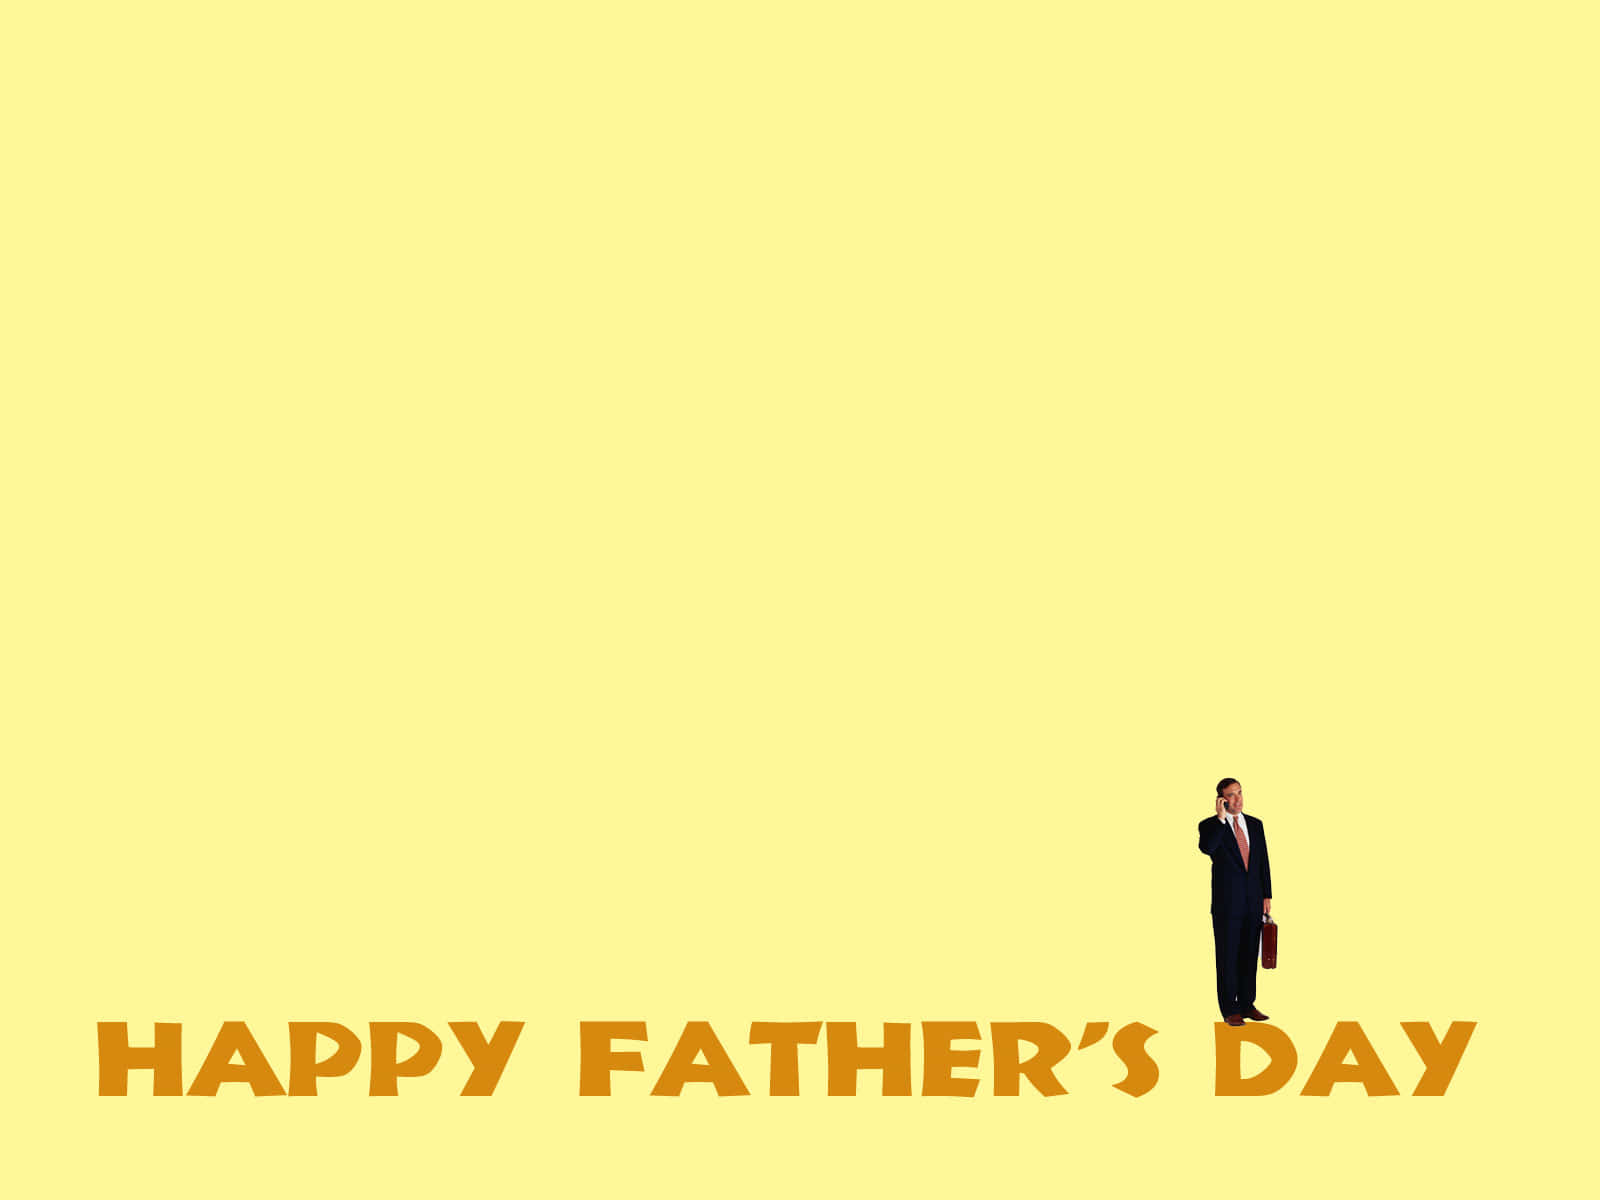 Show dad your love this Father's Day with this charming background!